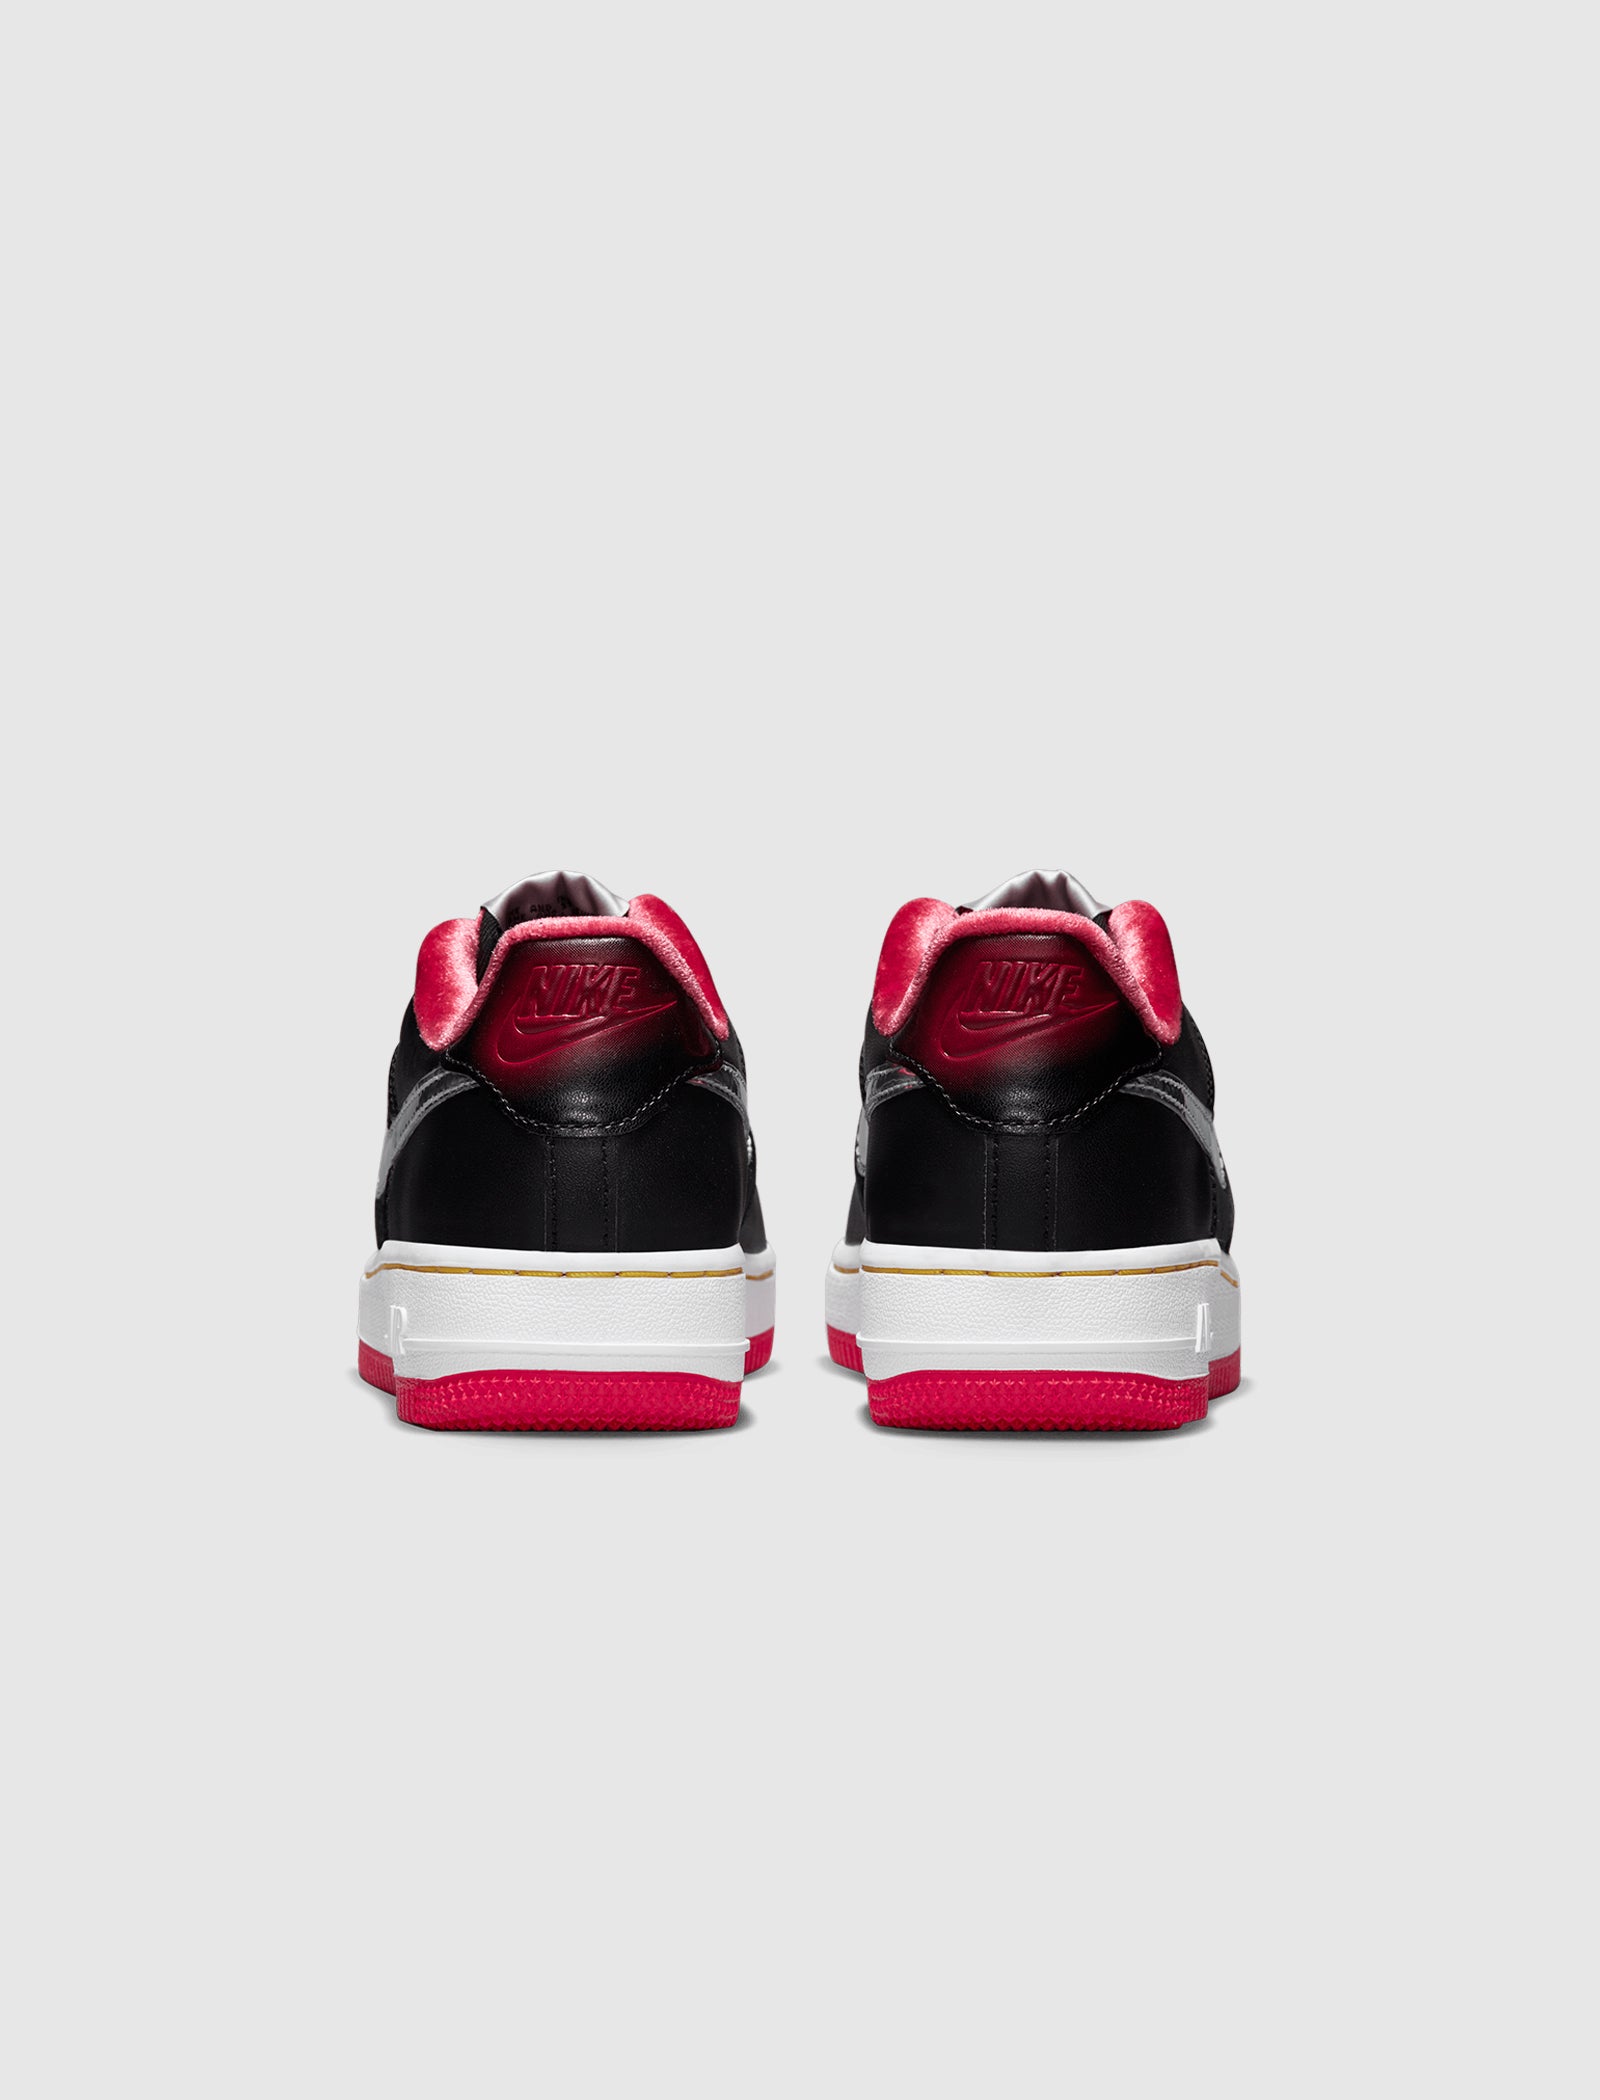 AIR FORCE 1 LOW "H-TOWN" GS